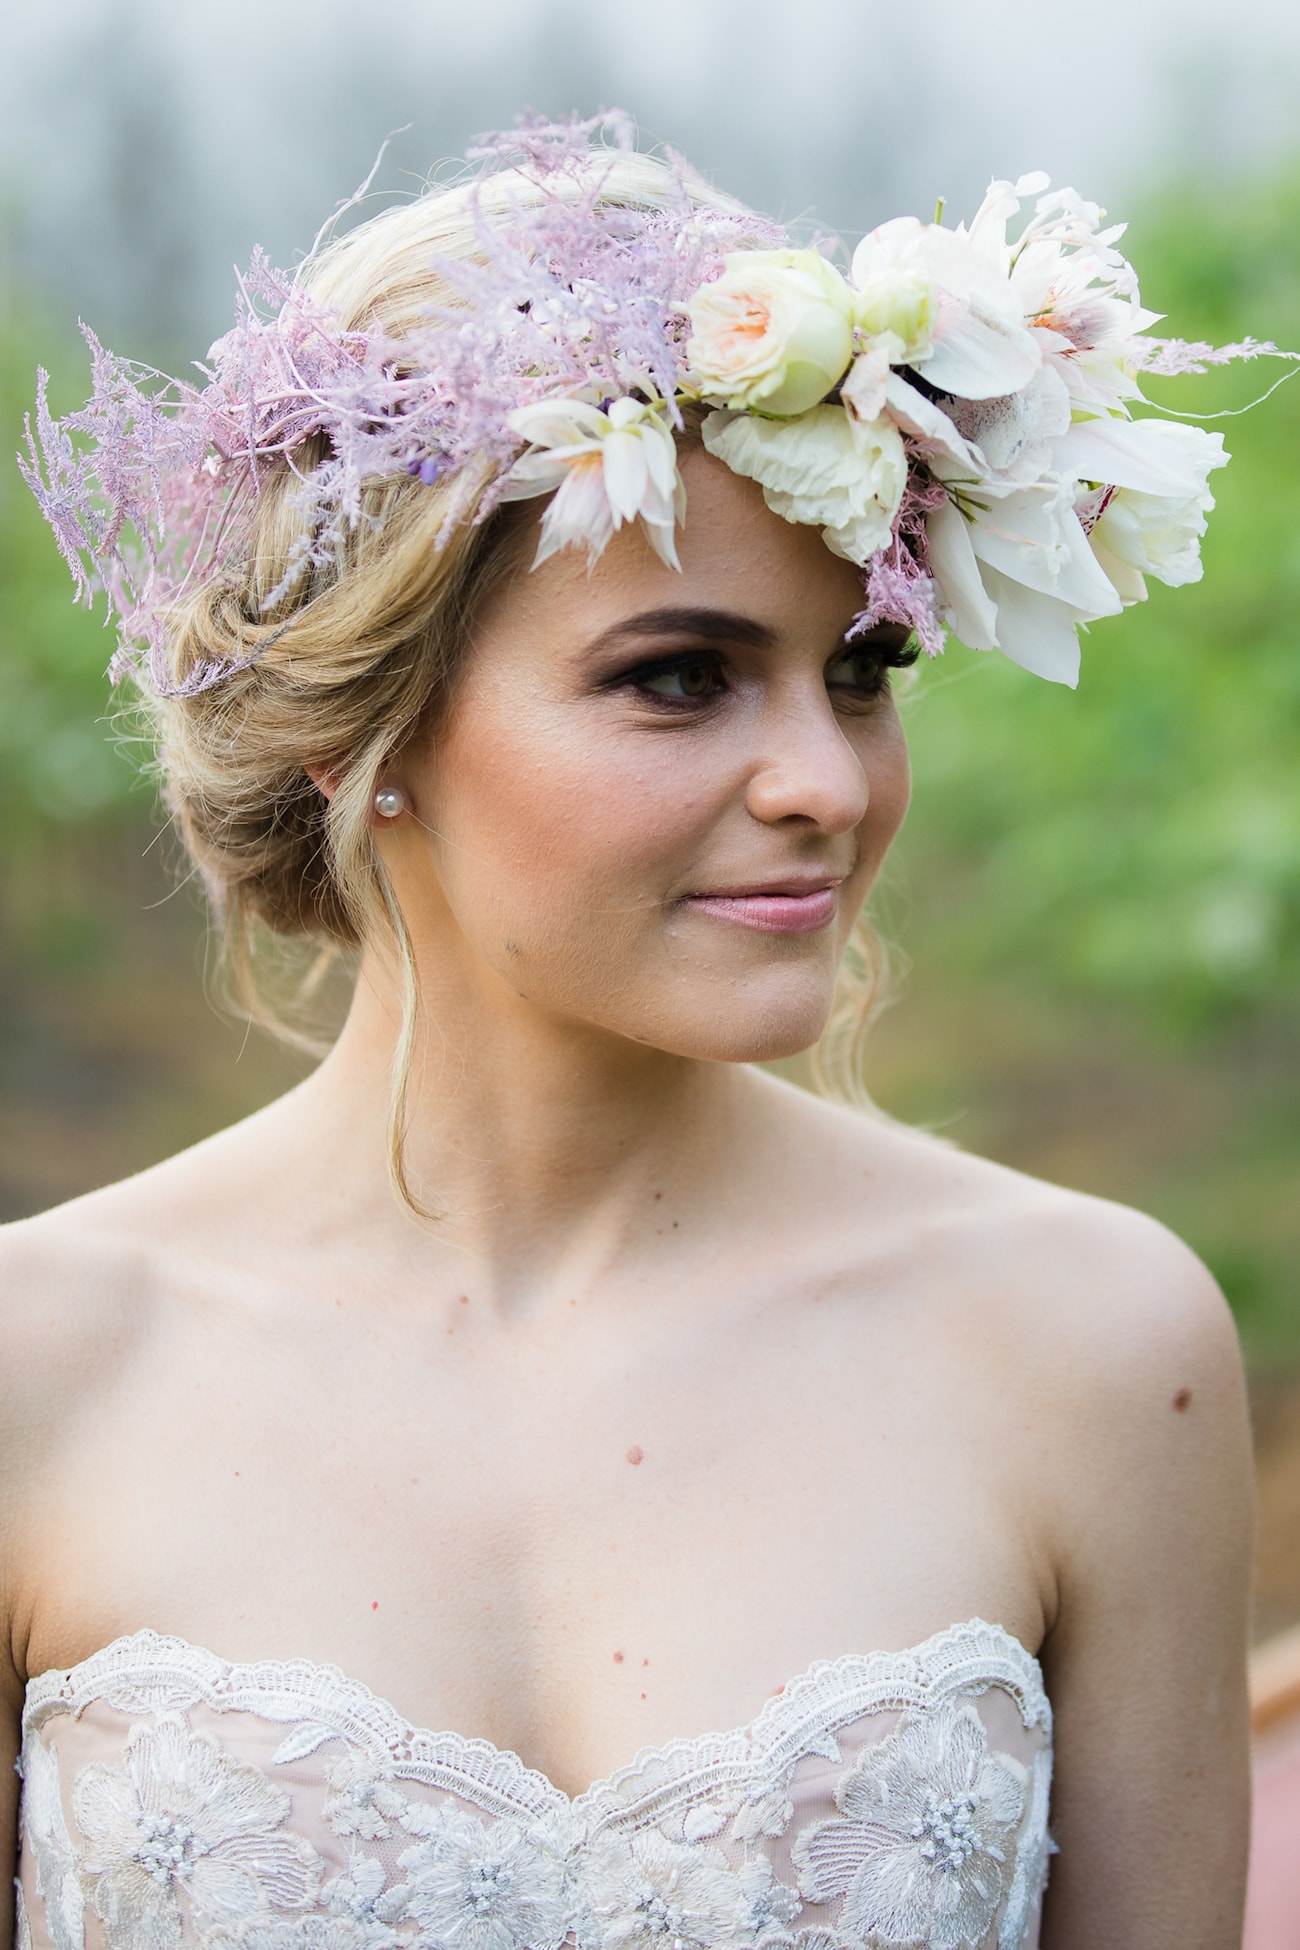 Spring Blossom Floral Crown | Image: Sulet Fourie